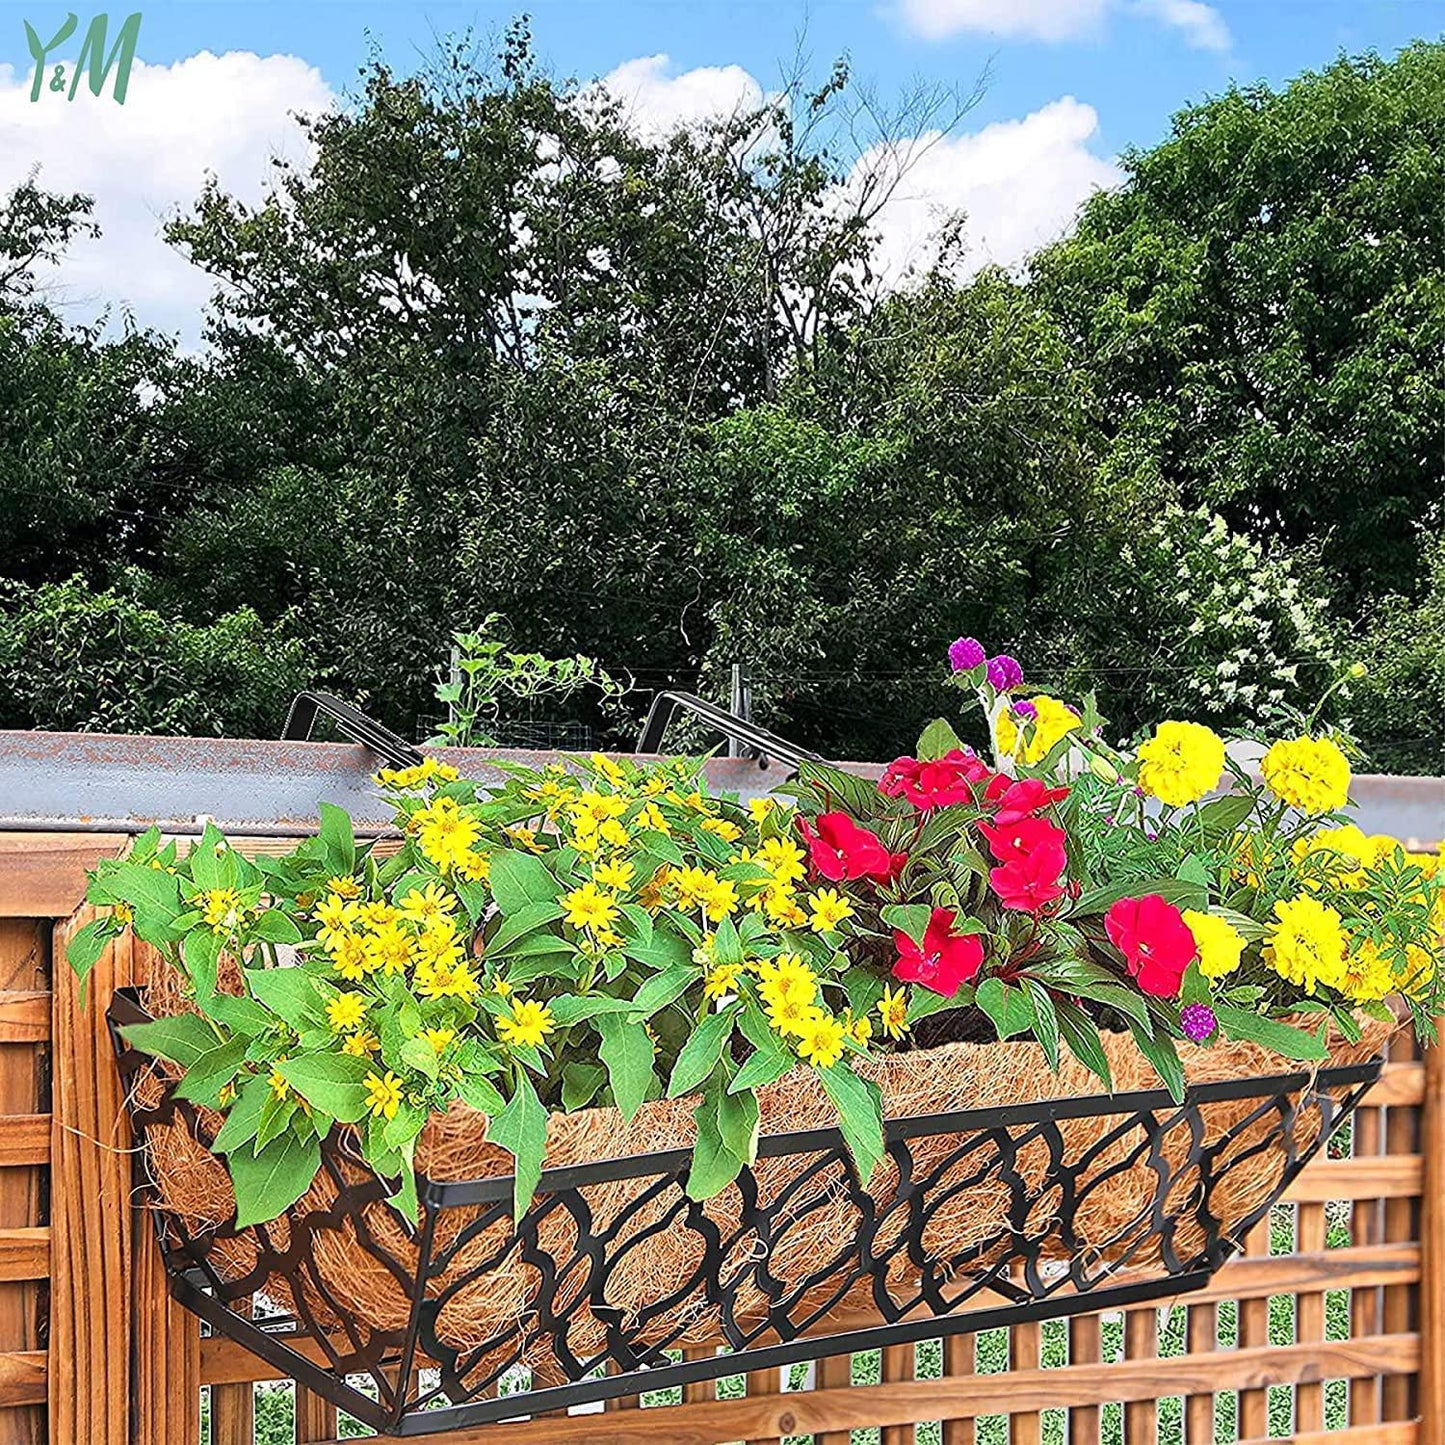 Y&M 24inch Window Planter Box 4Pcs Iron Window Deck Railing Planter with Coco Liner, Metal Horse Troughs Fence Planter for Outdoor Balcony Rail Fence Porch Patio